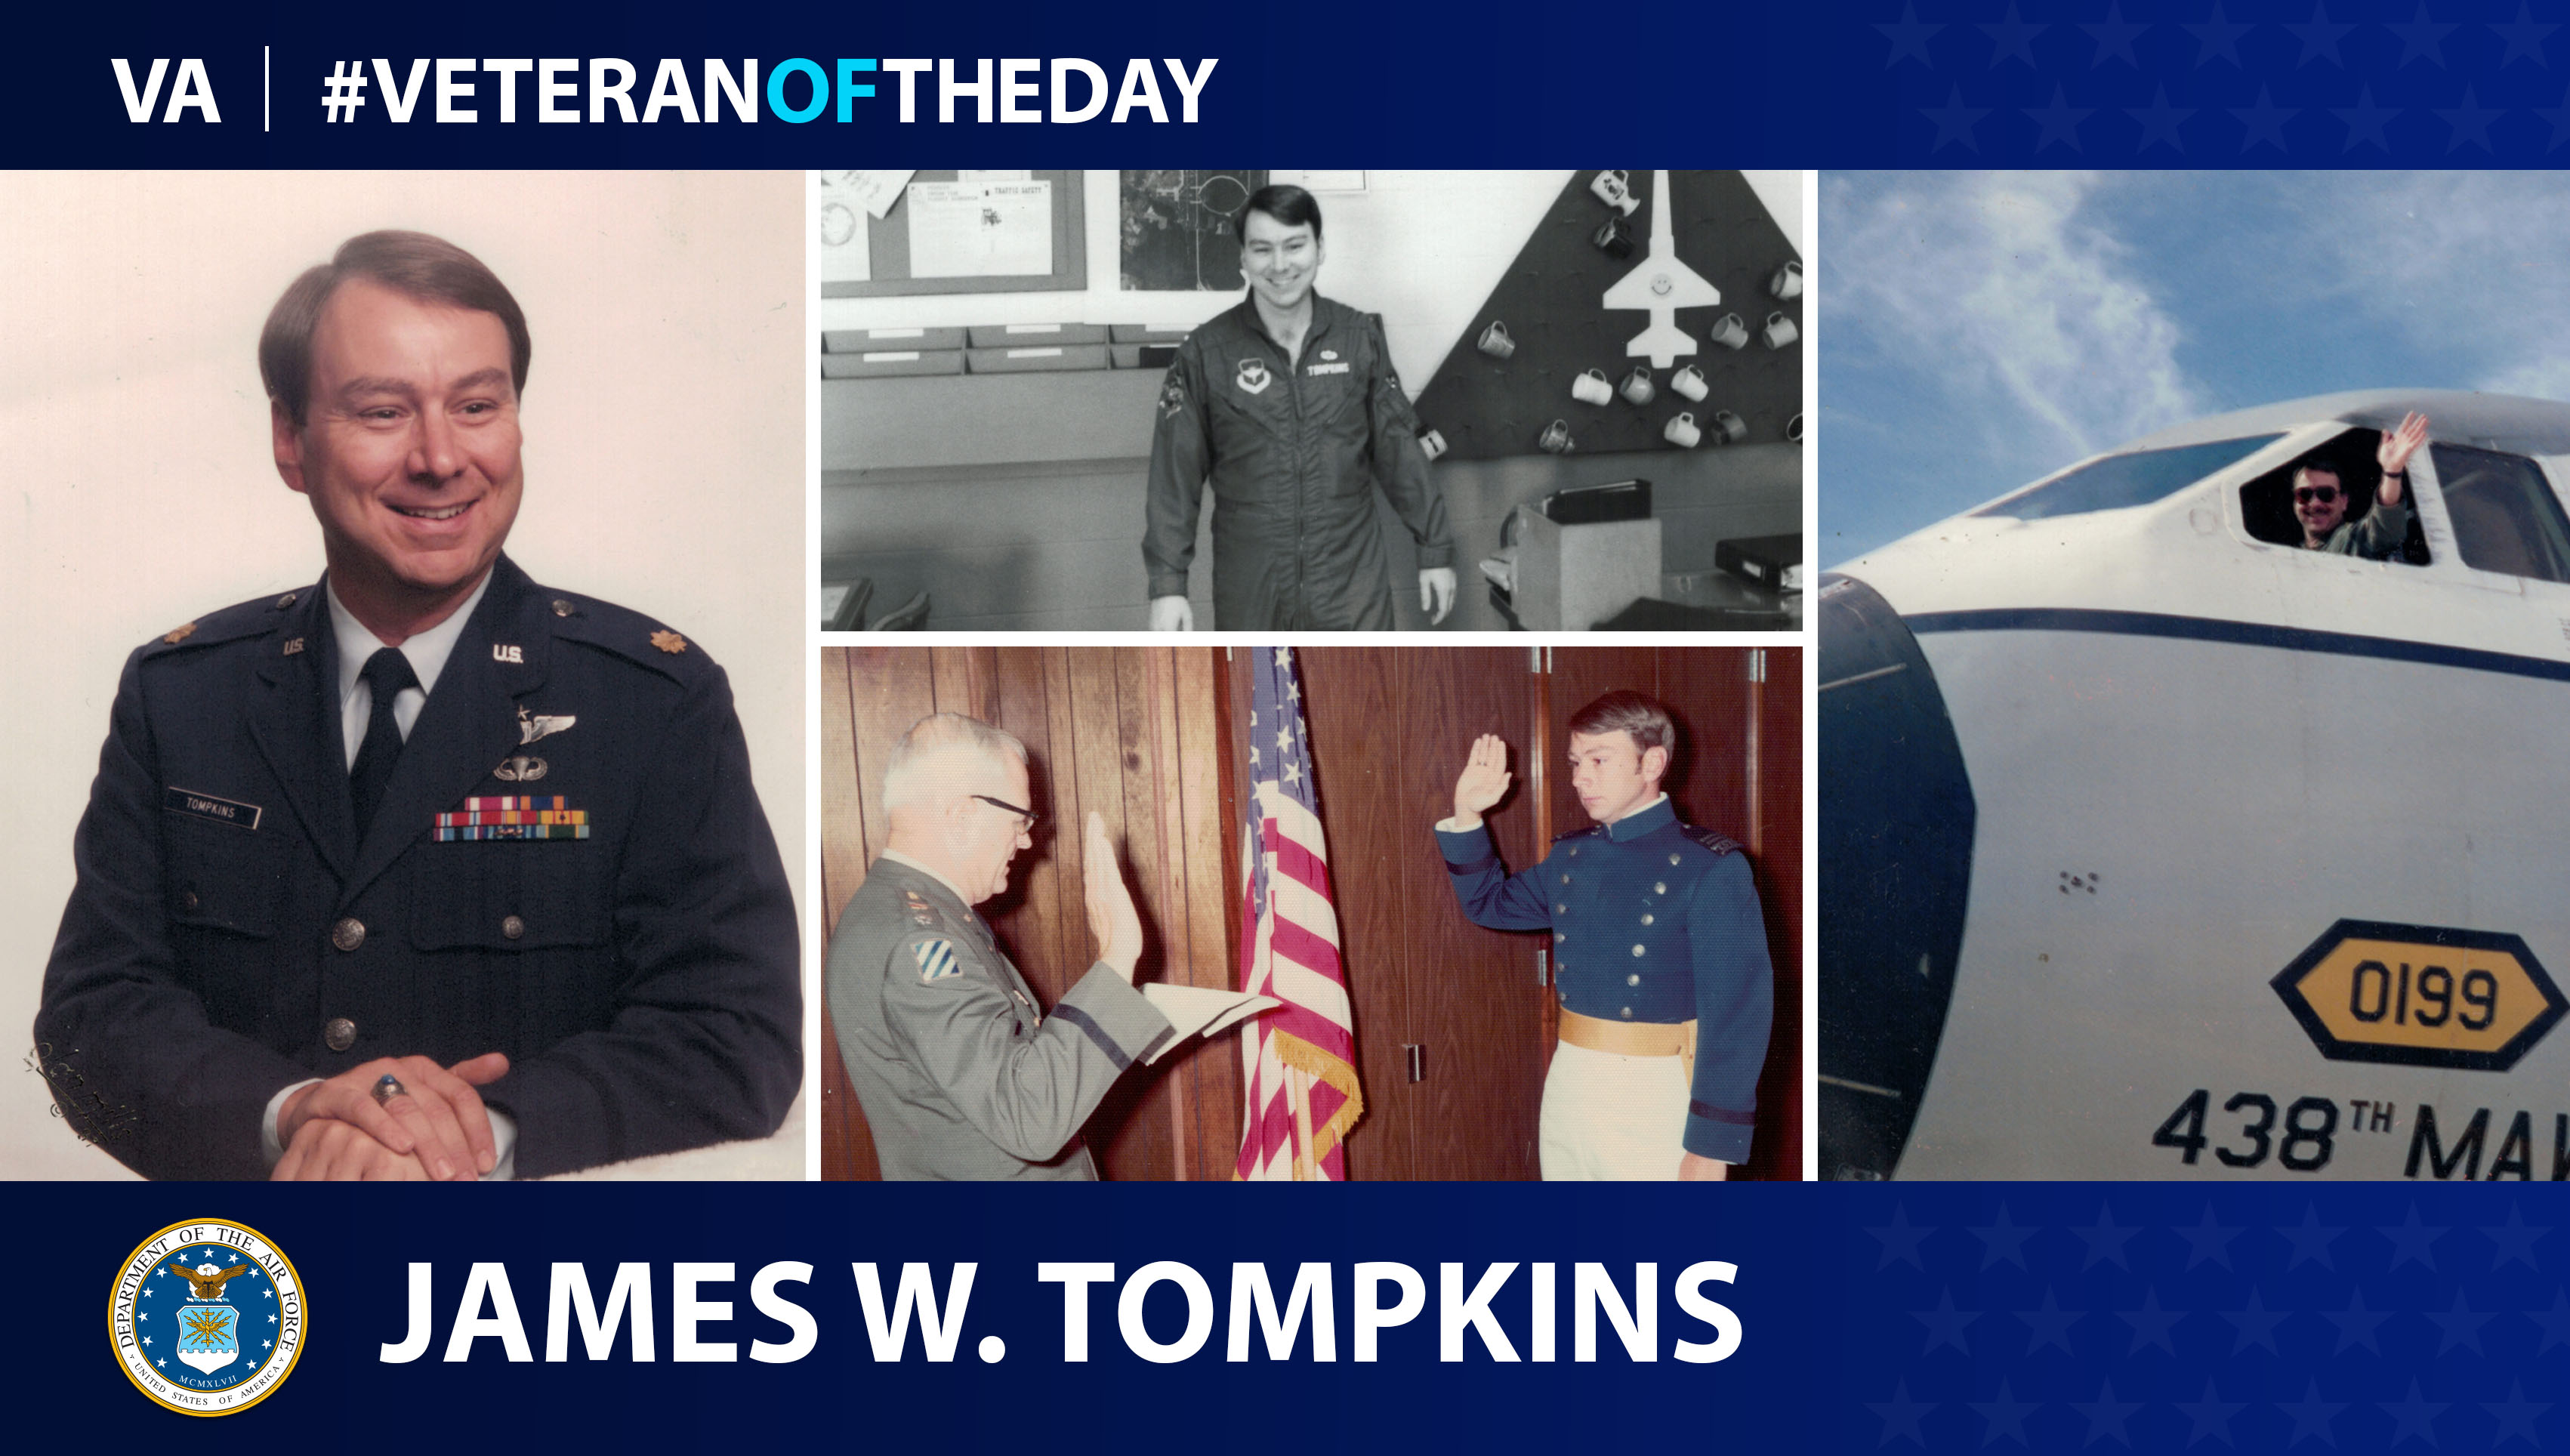 Air Force Veteran James W. Tompkins is today's Veteran of the Day.